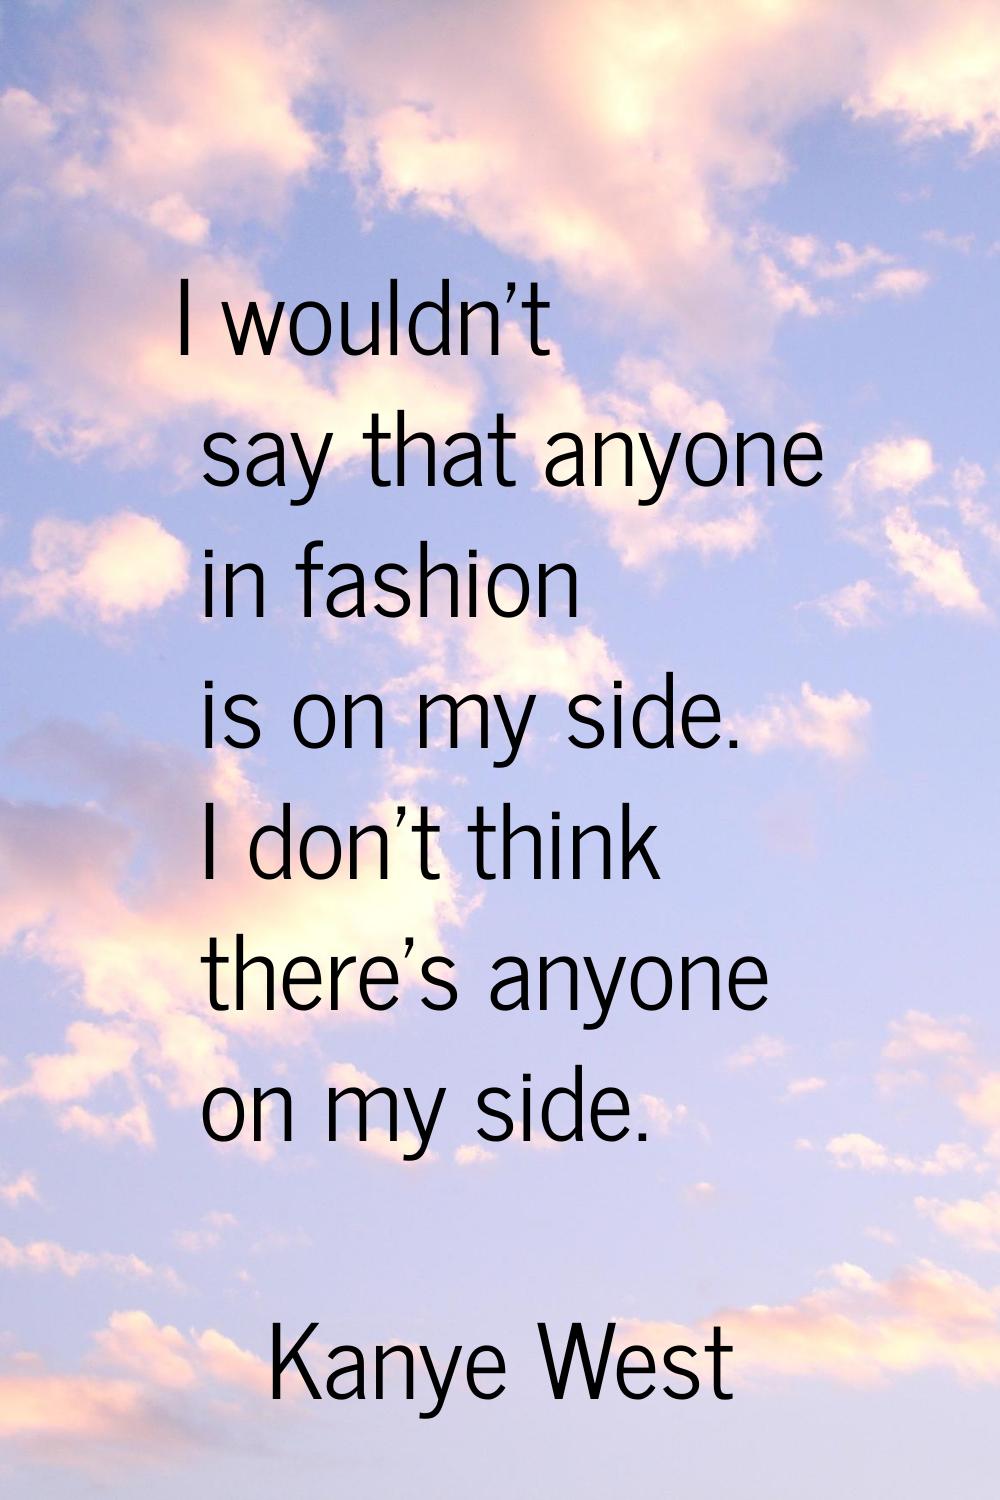 I wouldn't say that anyone in fashion is on my side. I don't think there's anyone on my side.